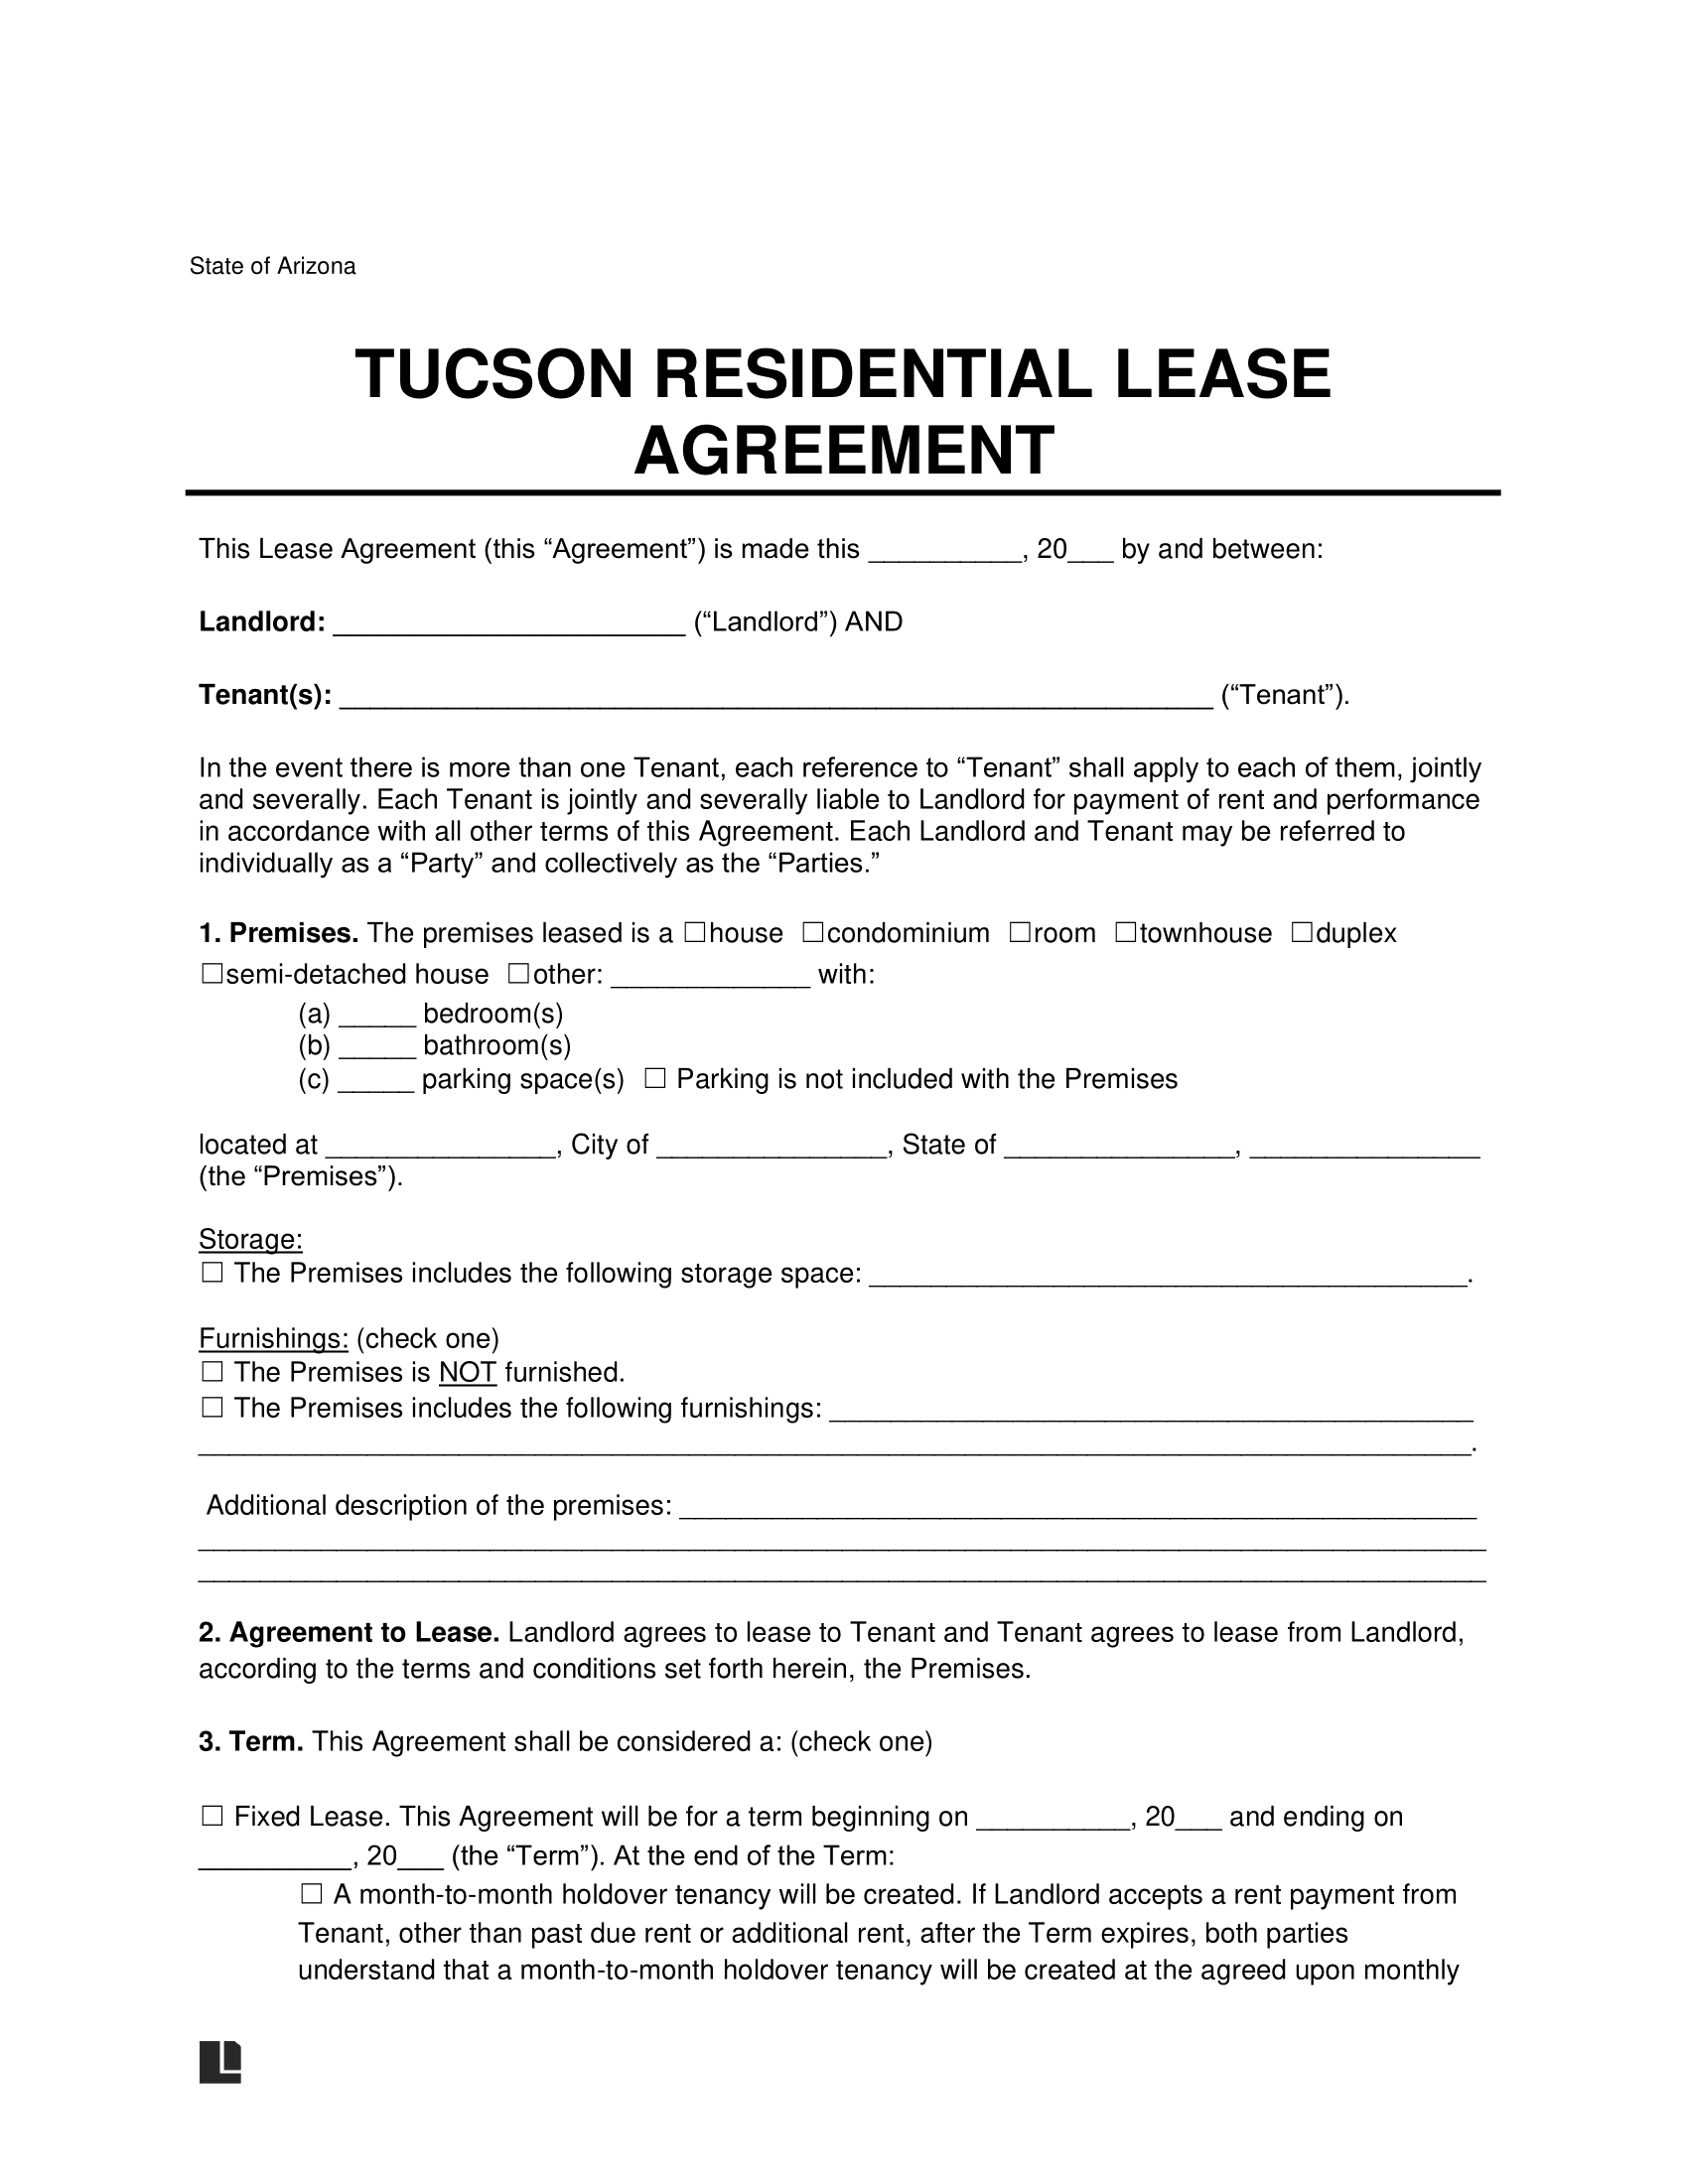 Tucson Residential Lease Agreement Template